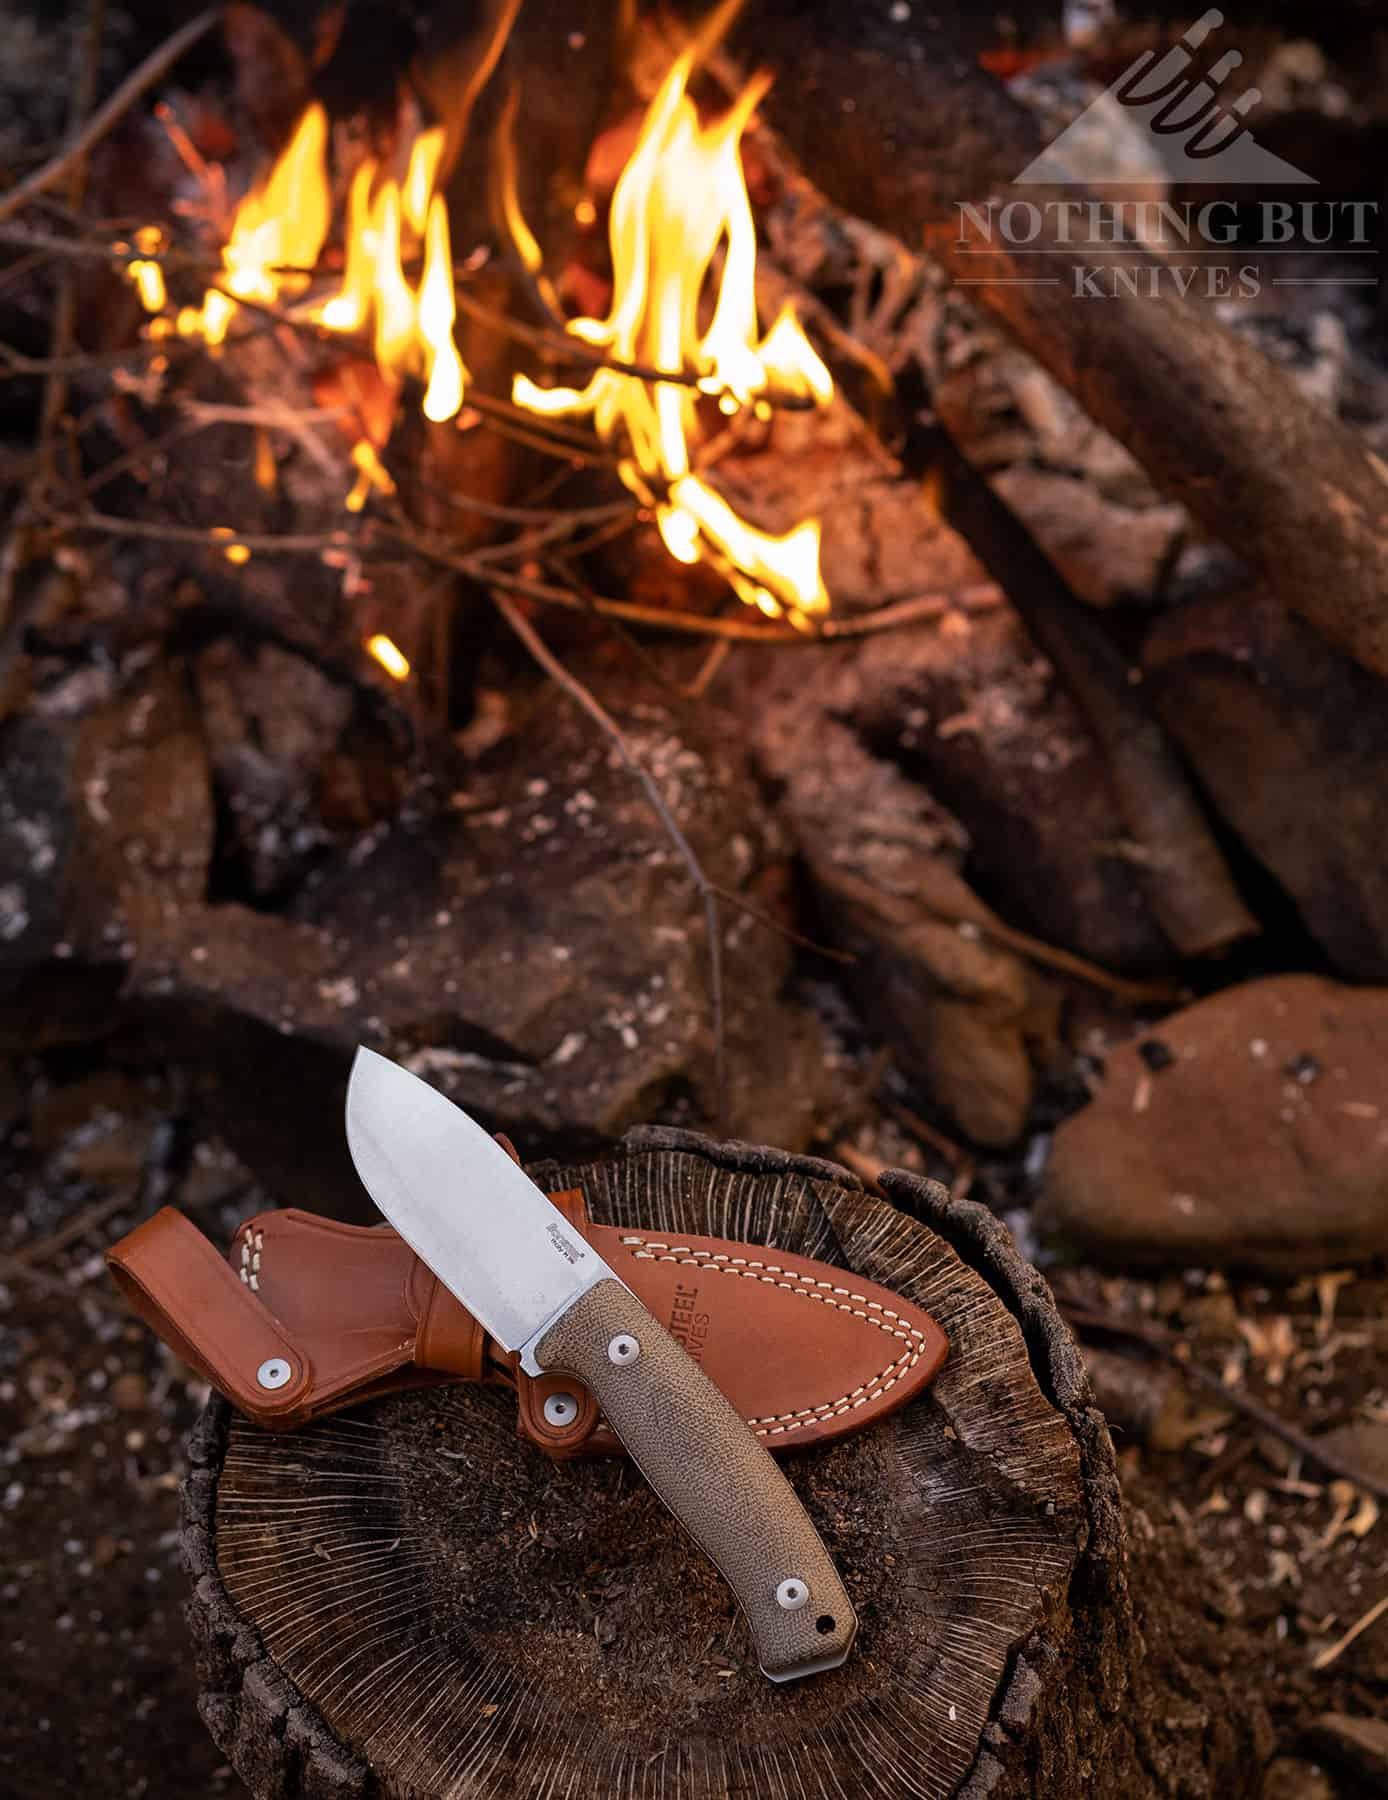 Theversatile LionSteel M2M is right at home on a backpacking or camping trip.